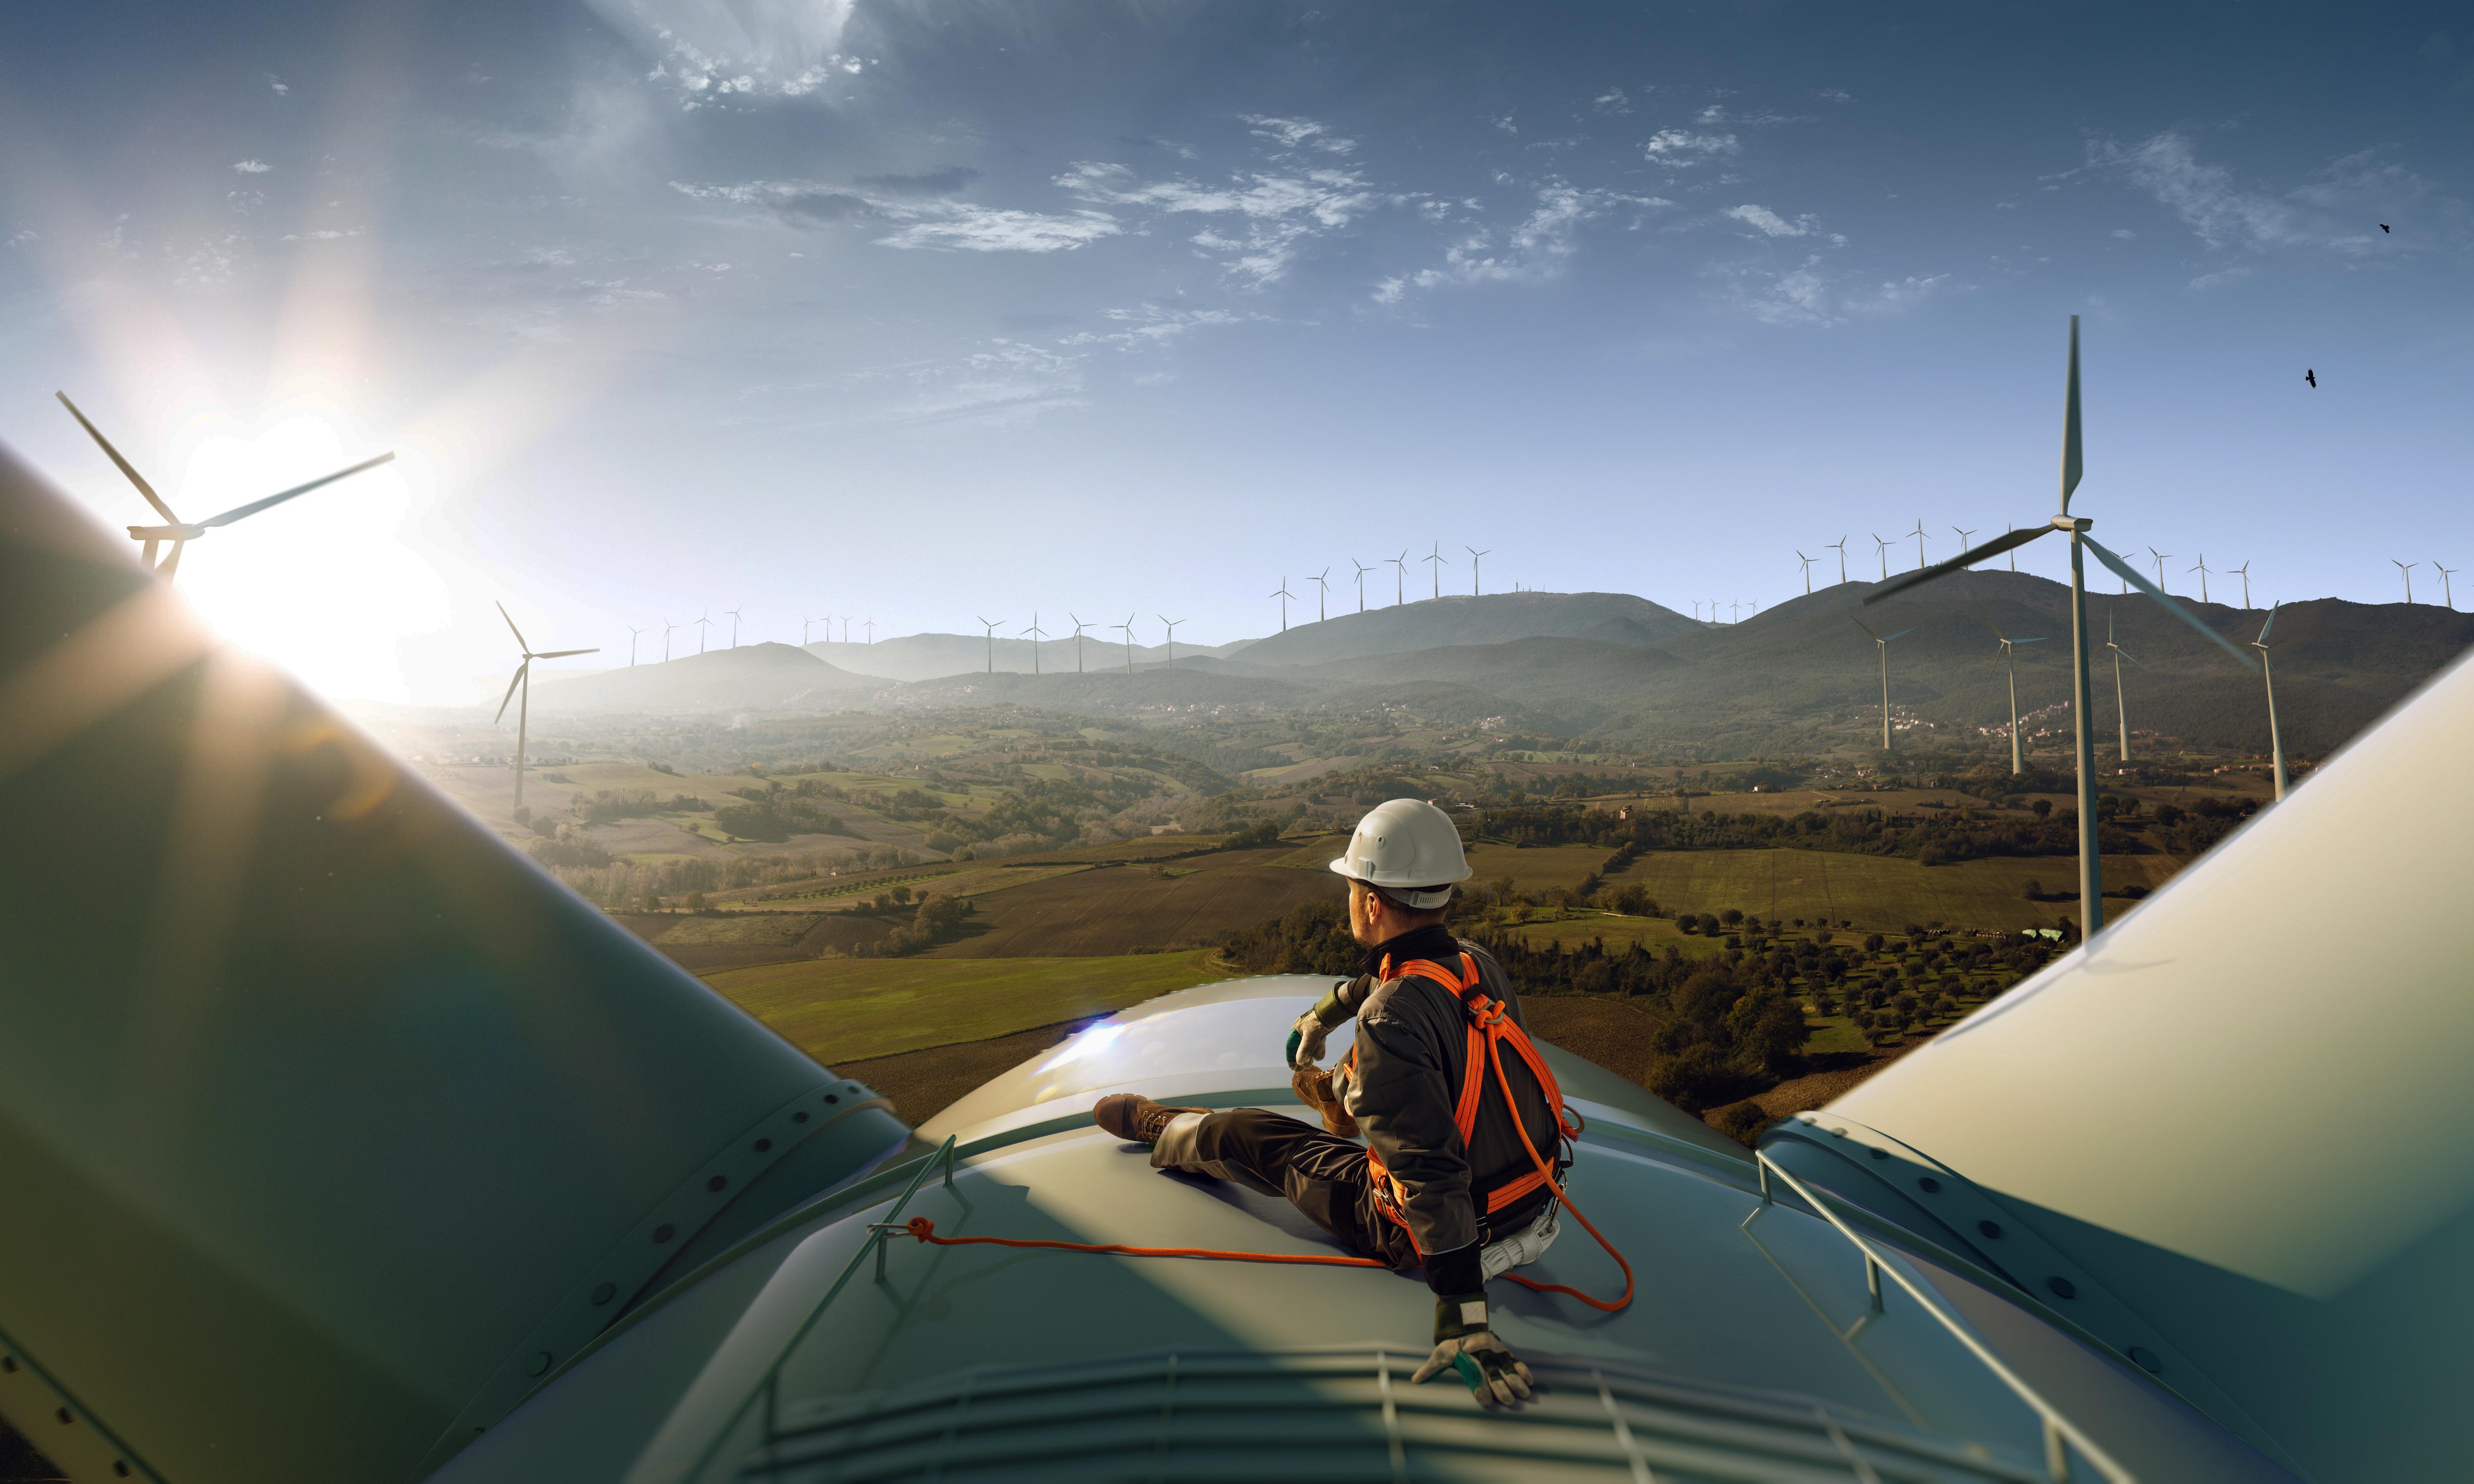 A worker on top of a wind turbine